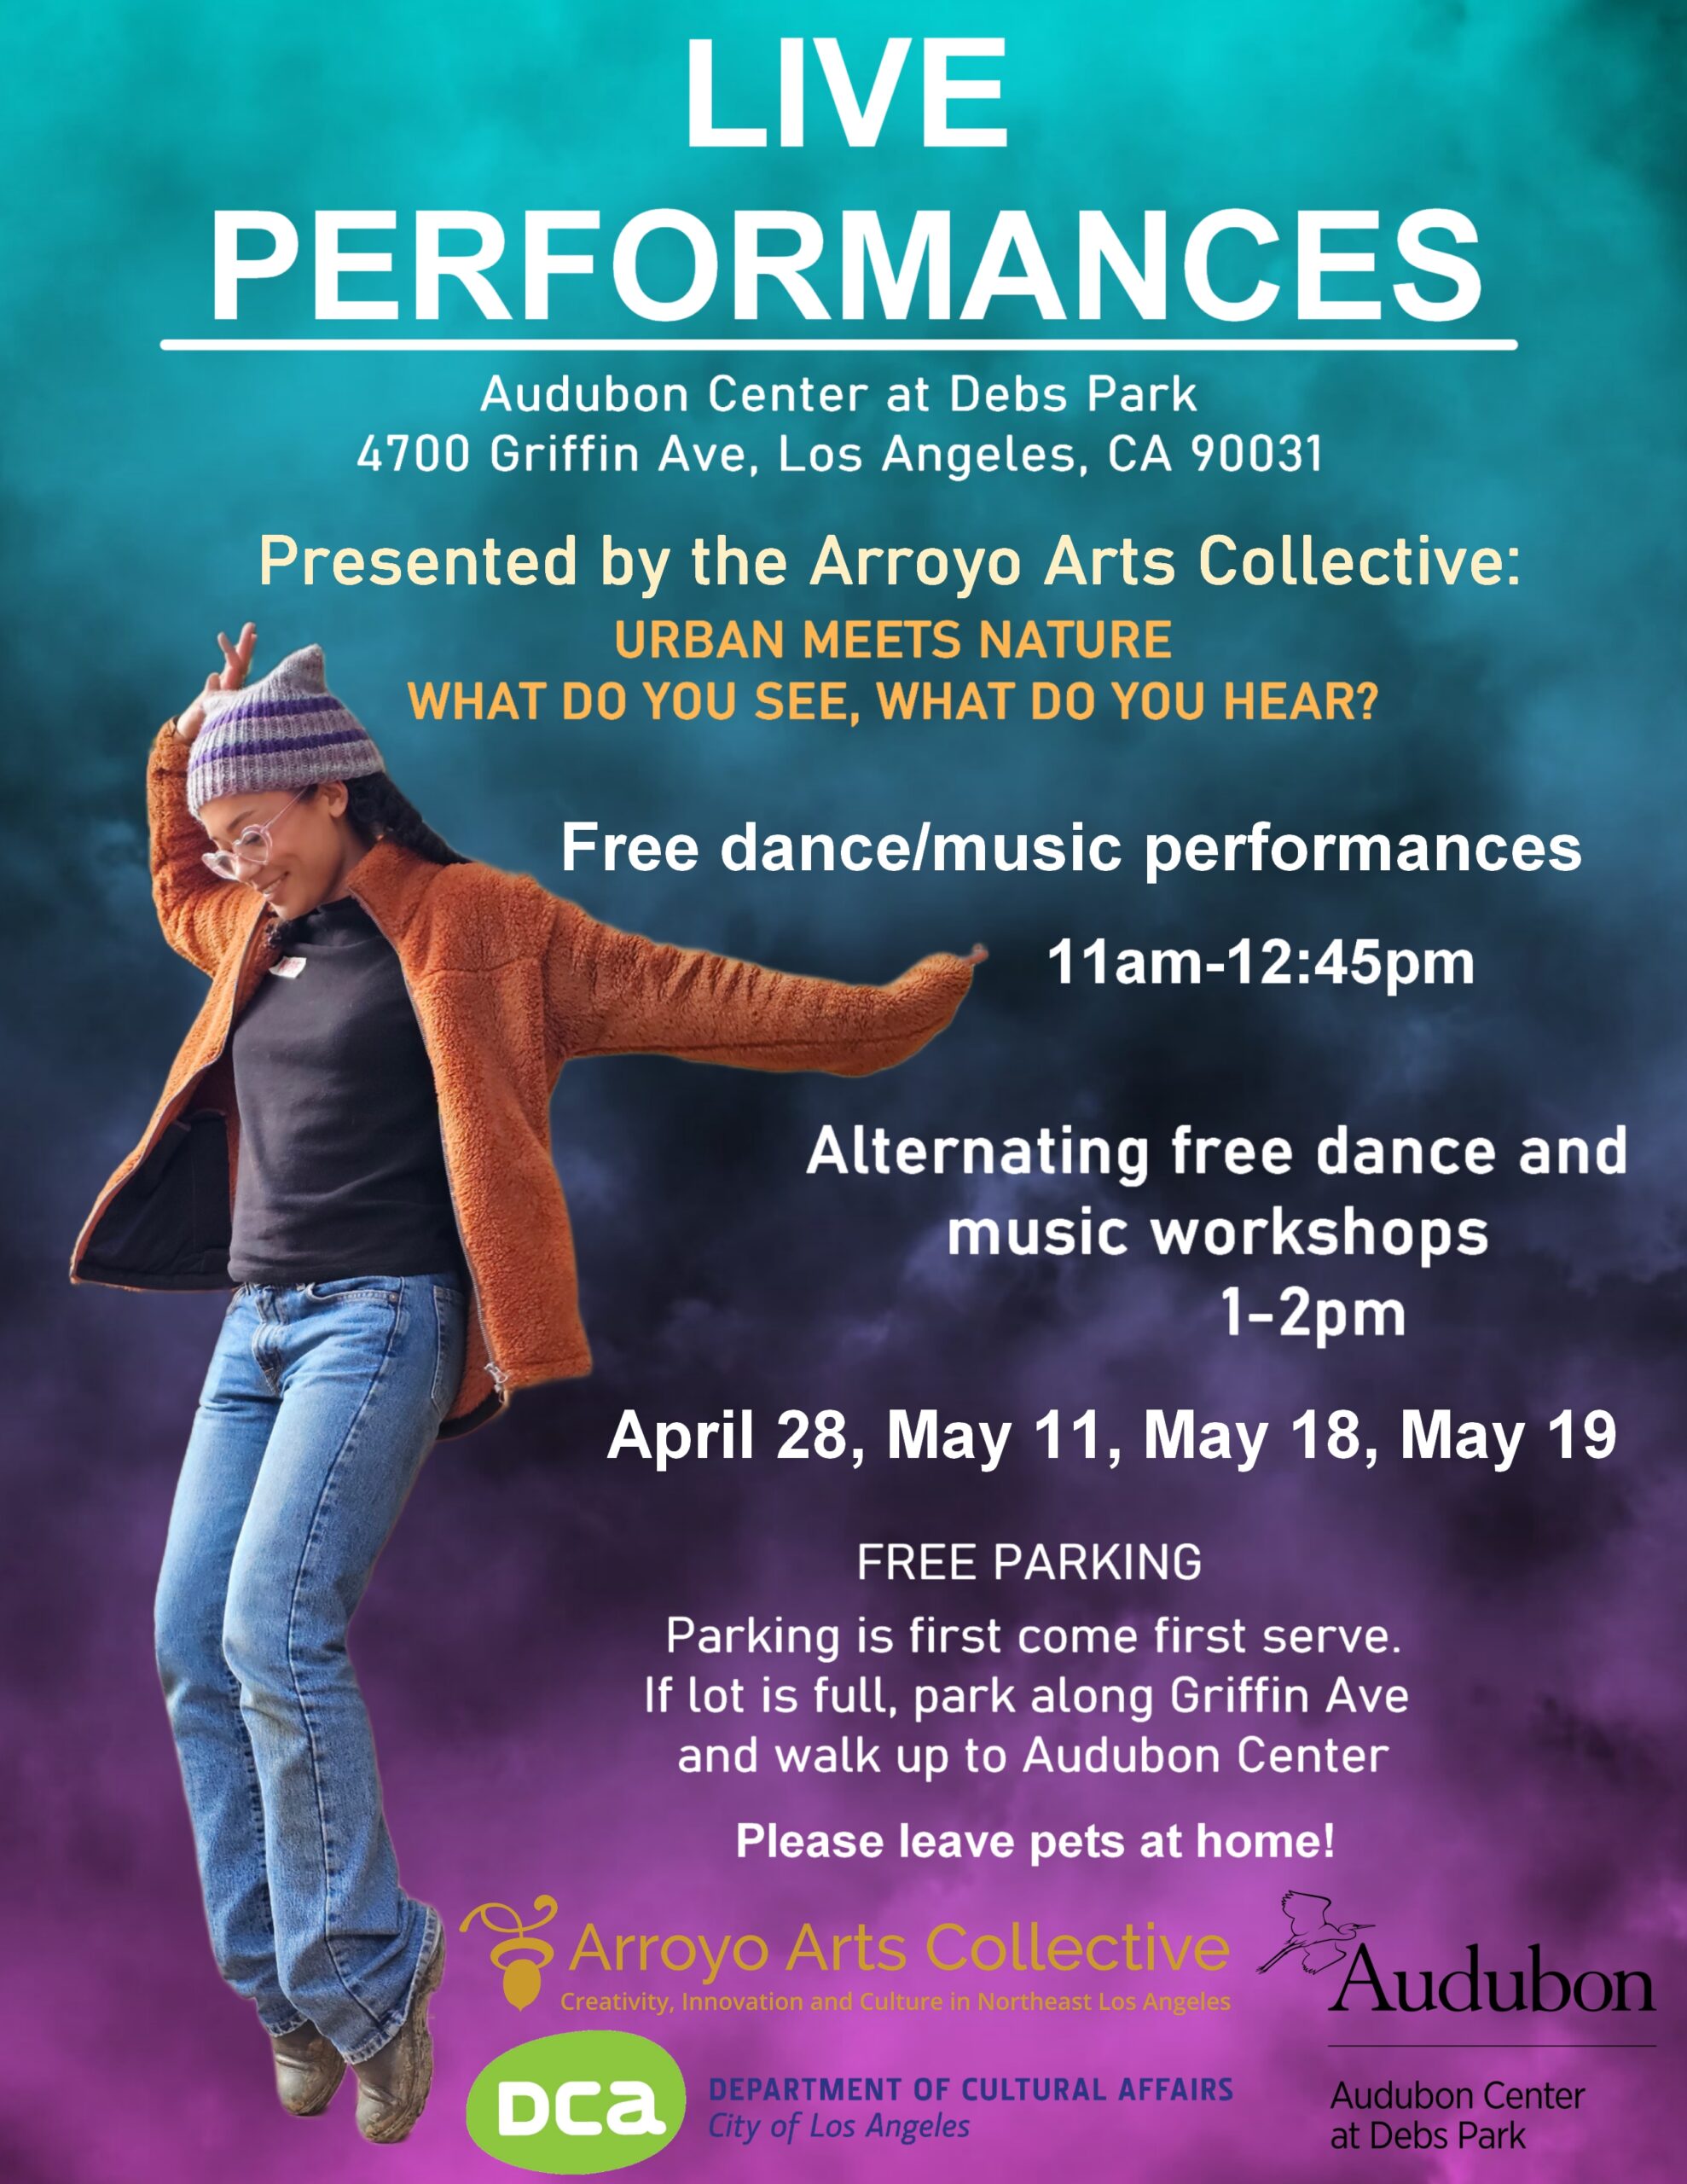 The image shows a poster advertising live performances at the Audubon Center at Debs Park in Los Angeles, CA. The performances are presented by the Arroyo Arts Collective and focus on the theme "Urban Meets Nature." The schedule includes free dance and music performances as well as workshops on specific dates in April and May. Free parking is available on a first-come, first-served basis.